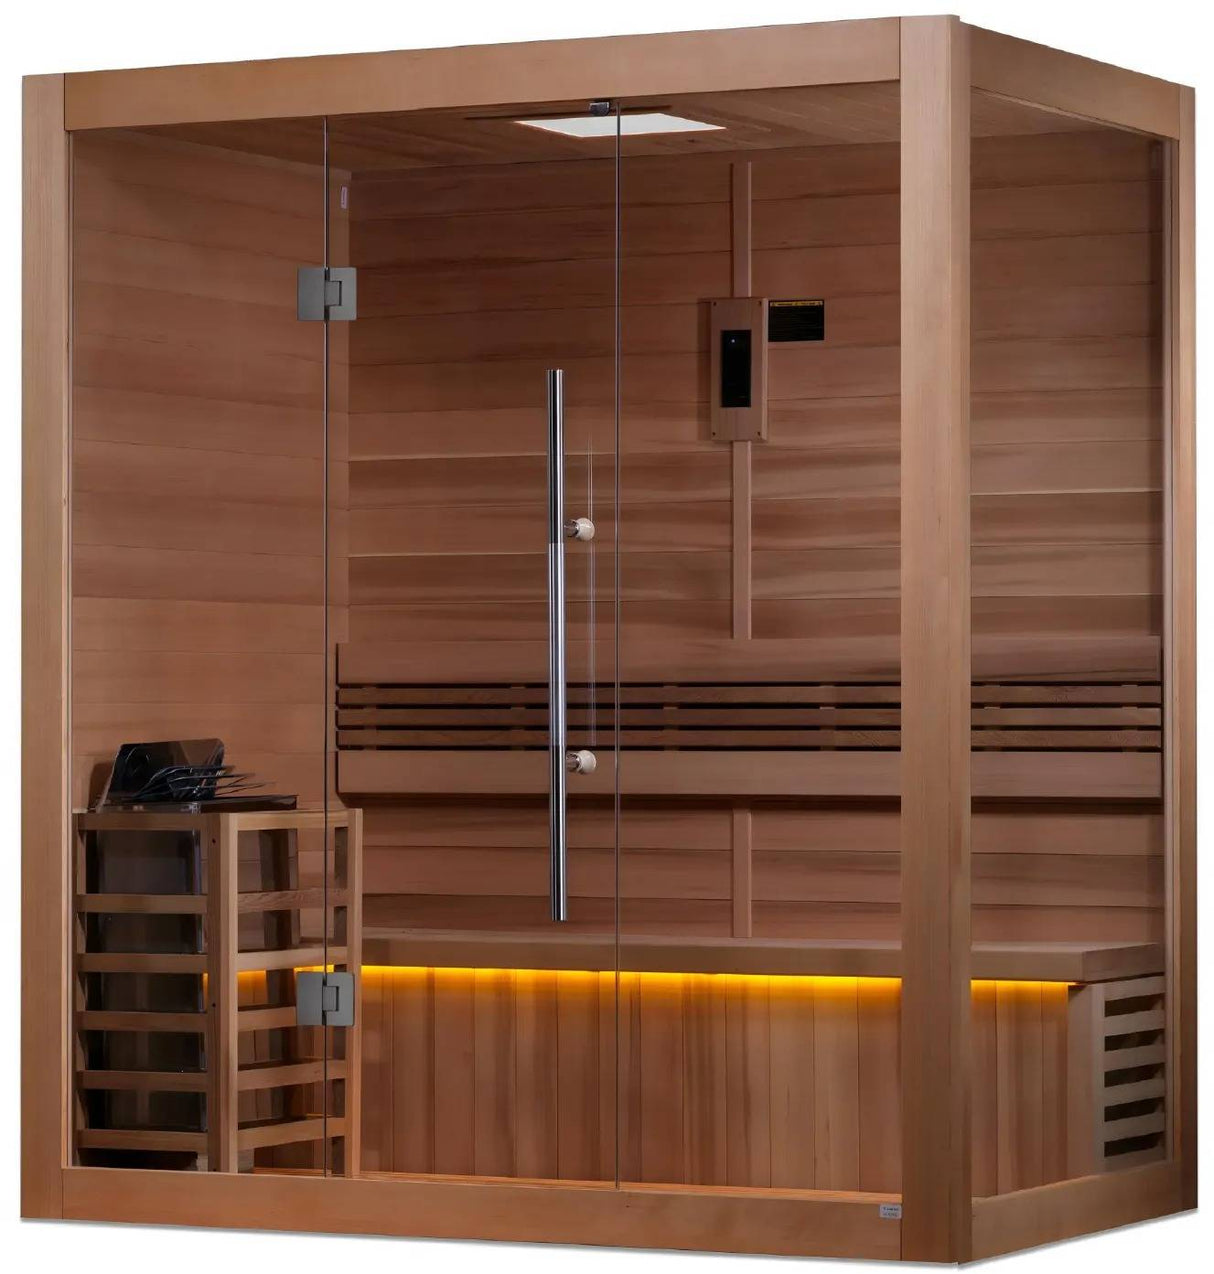 ZiahCare's Golden Designs Forssa 3 Person Traditional Sauna Mockup Image 4